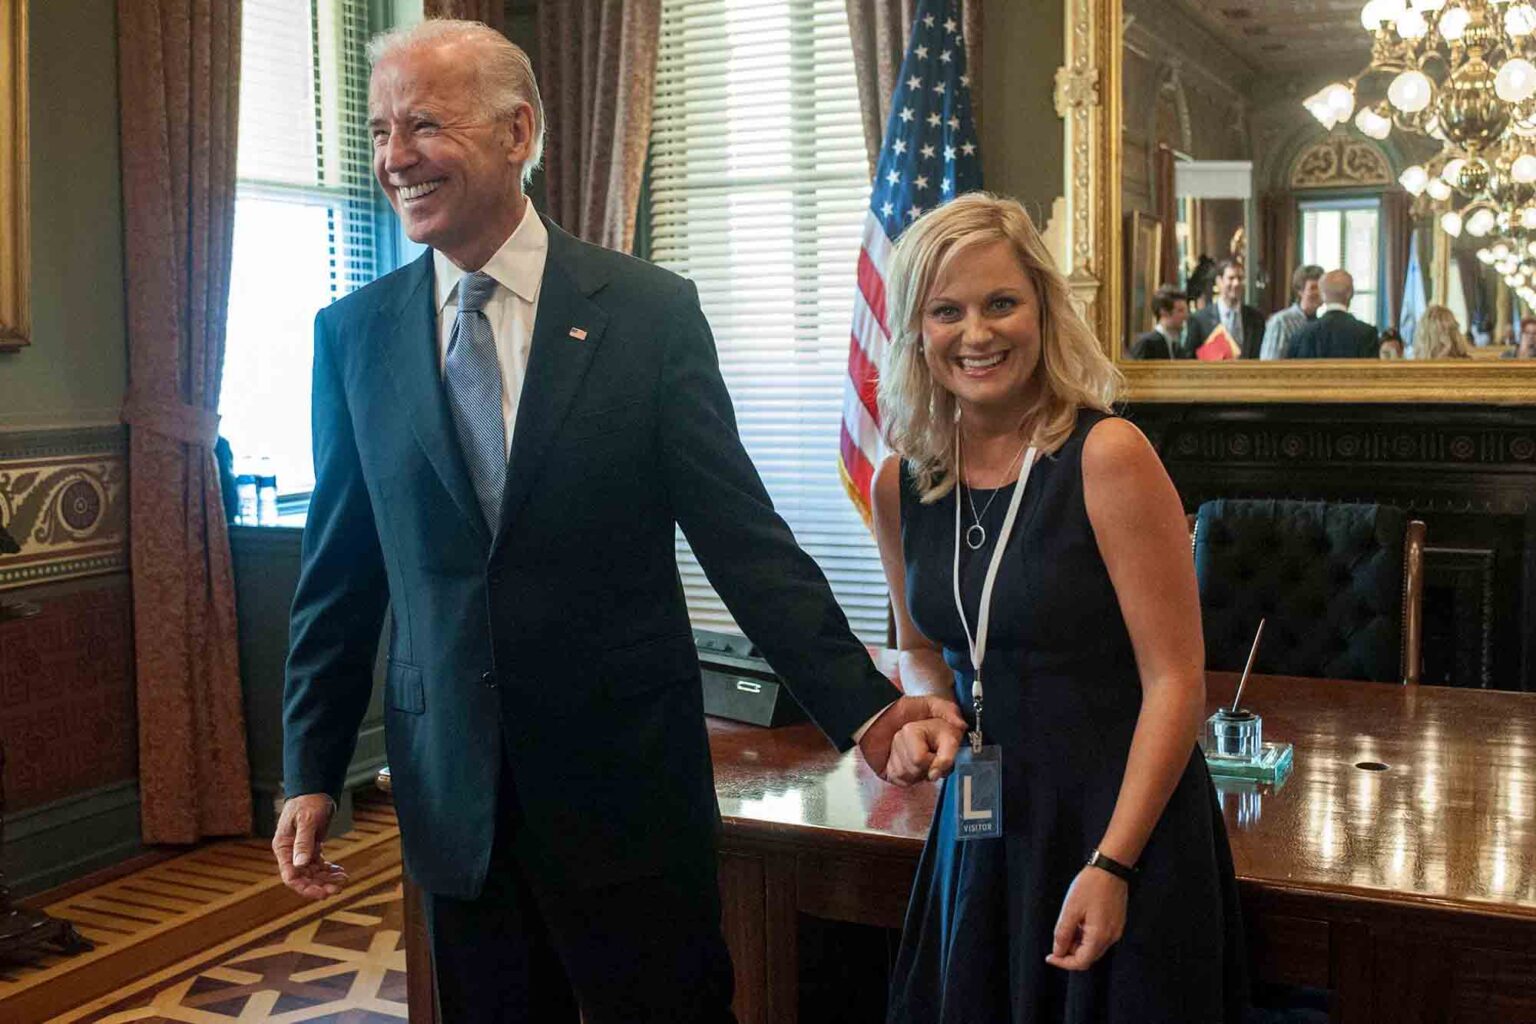 Today is the inauguration of Joe Biden as president and the internet came prepared with plenty of Leslie Knope memes.